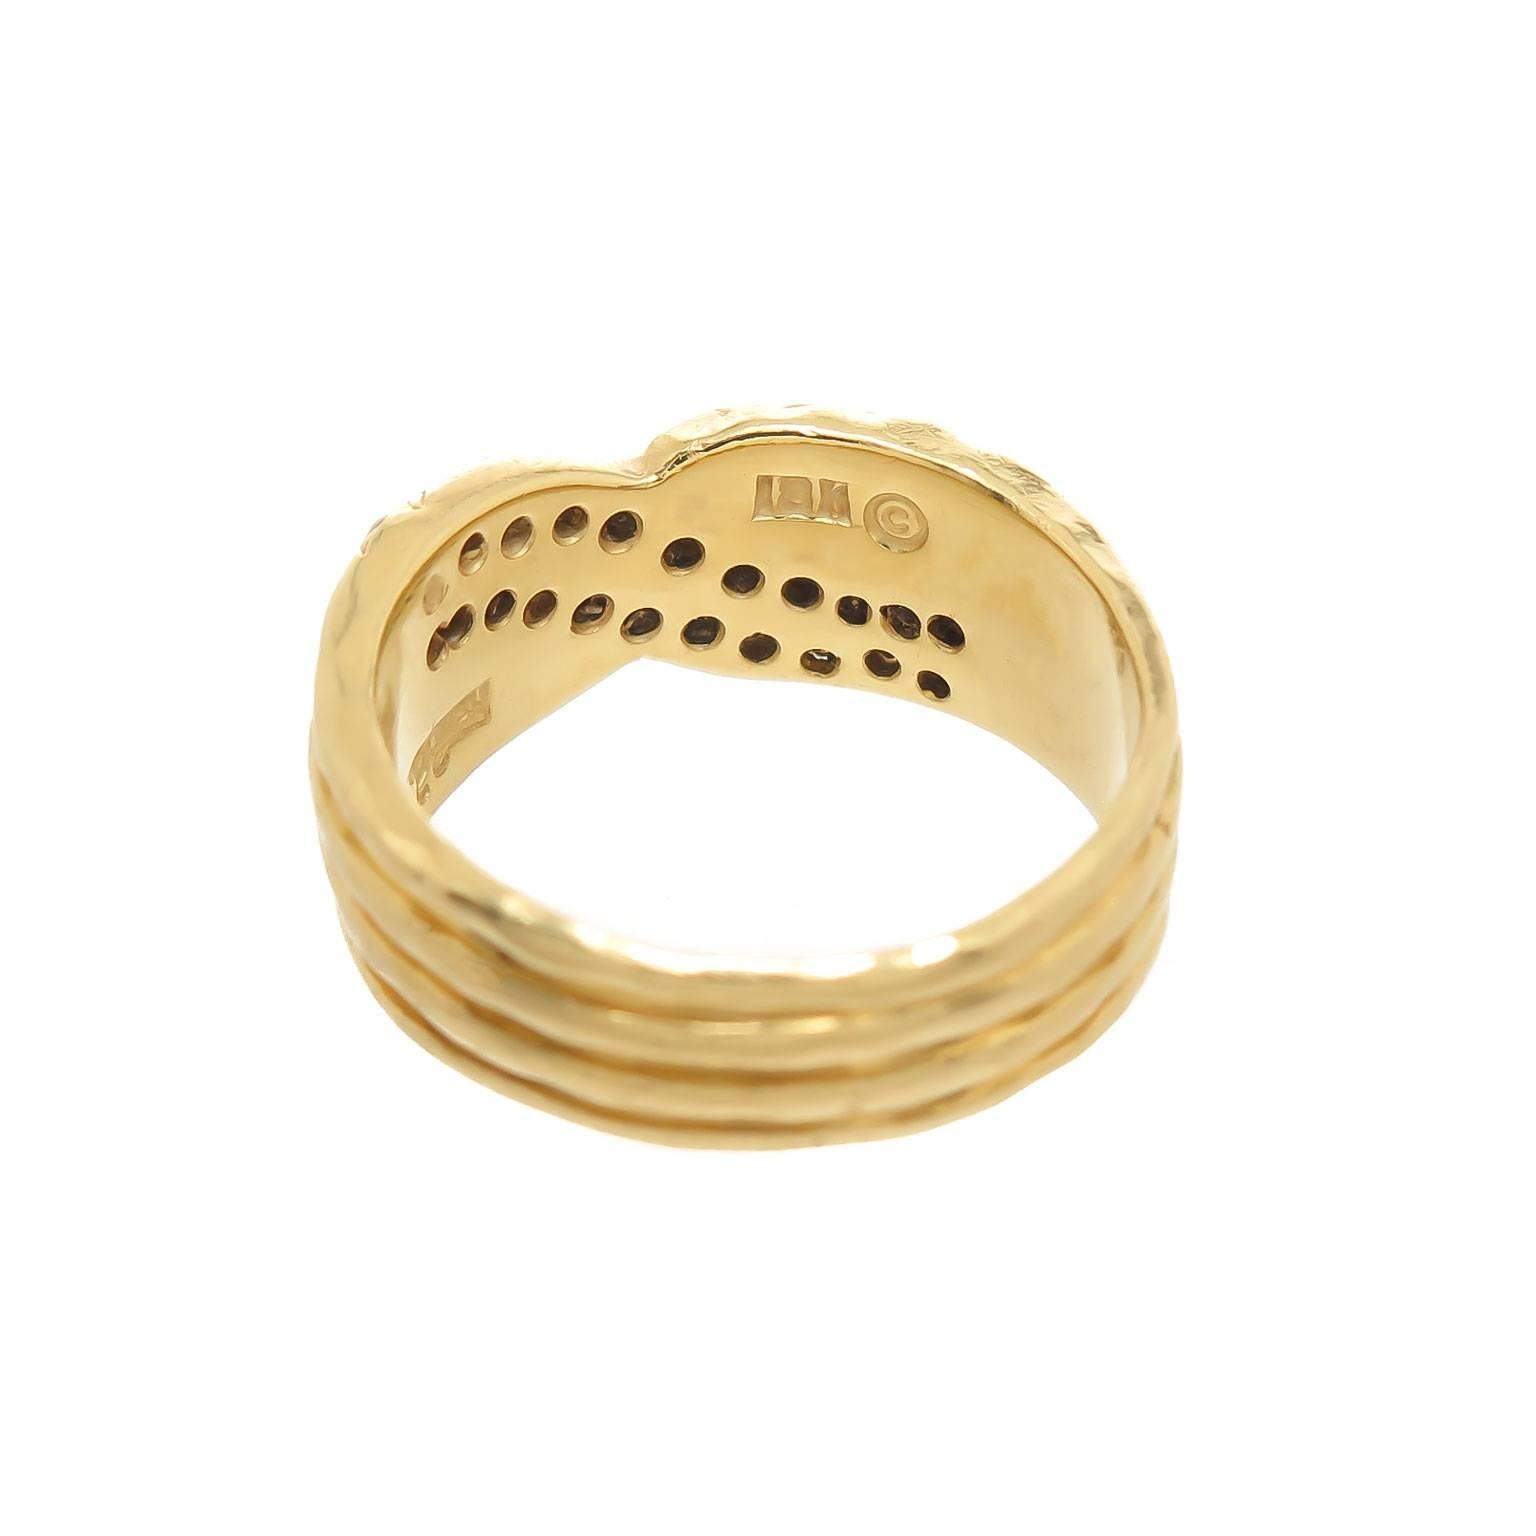 Circa 2000 Henry Dunay 18K yellow Gold Ring with the signature Dunay hammered finish, set with 2 rows of Round Brilliant cut Diamonds totaling .75 Carat. Measuring 3/4 inch across the top and 5/16 inch wide, finger size = 7 Comes in the original box